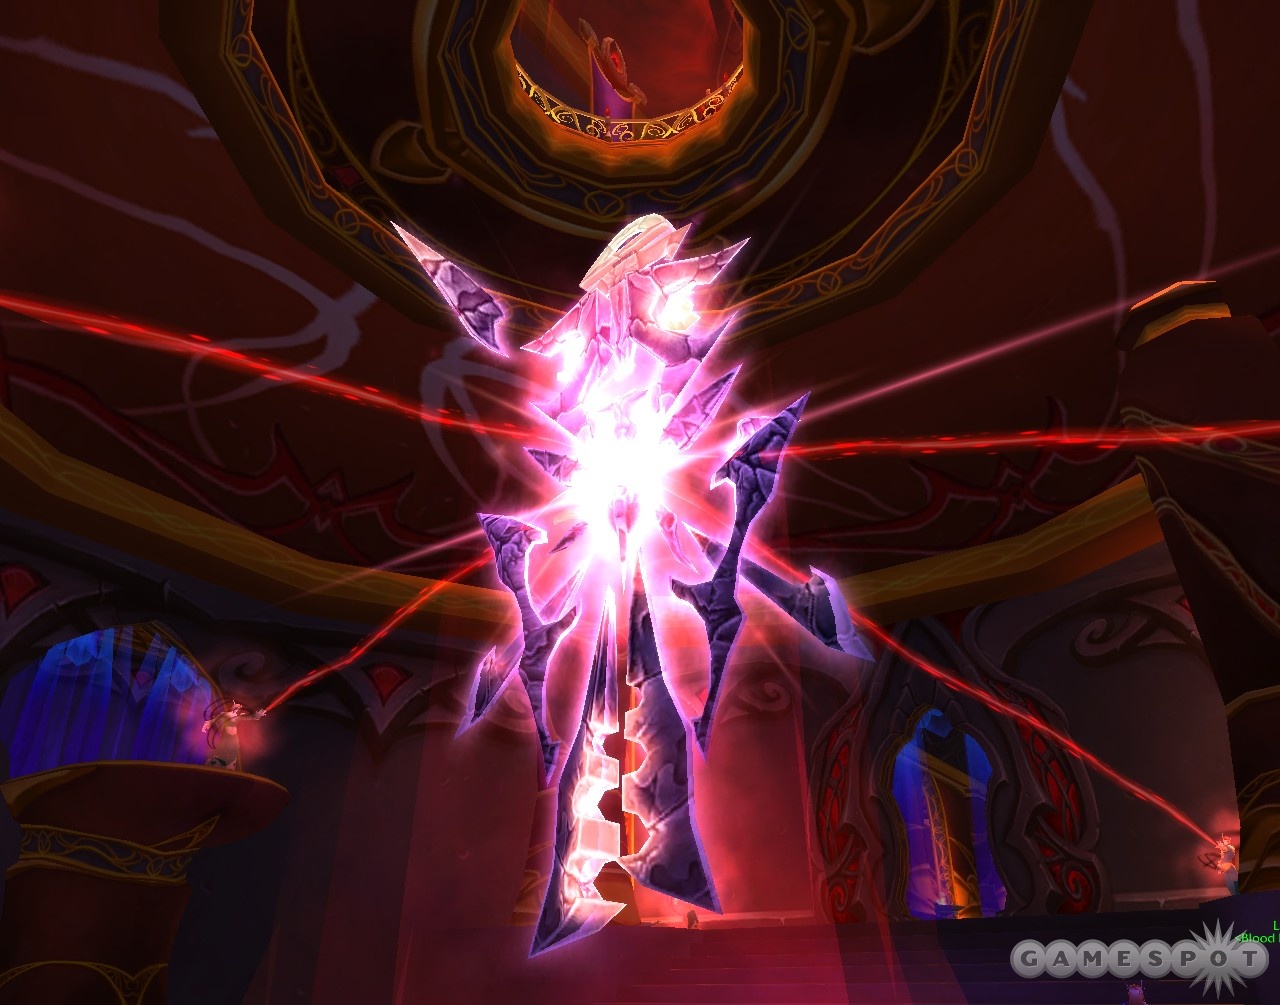 At the center of Silvermoon lies the captive Naaru that the Blood Elves use to empower their Blood Knights.